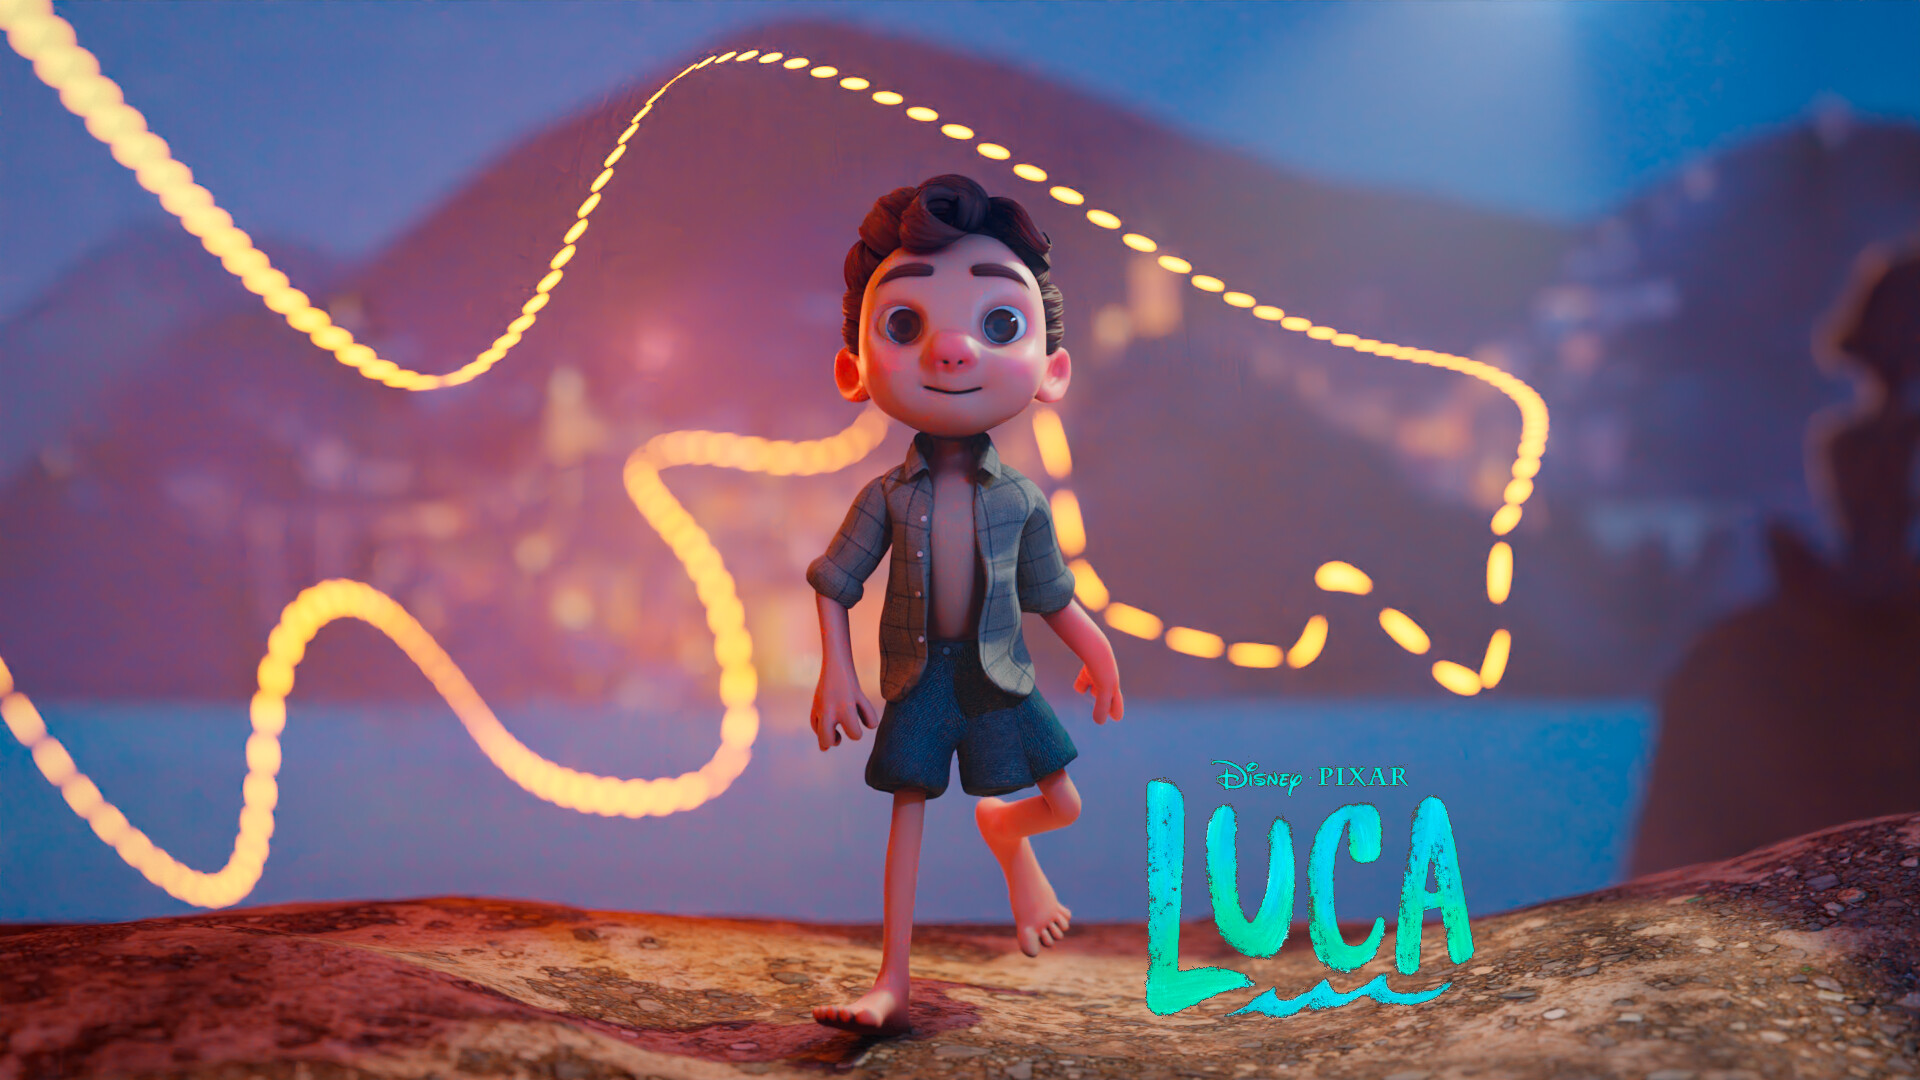 Luca: Pixar, A 13-year-old boy who also happens to be a sea monster. 1920x1080 Full HD Wallpaper.